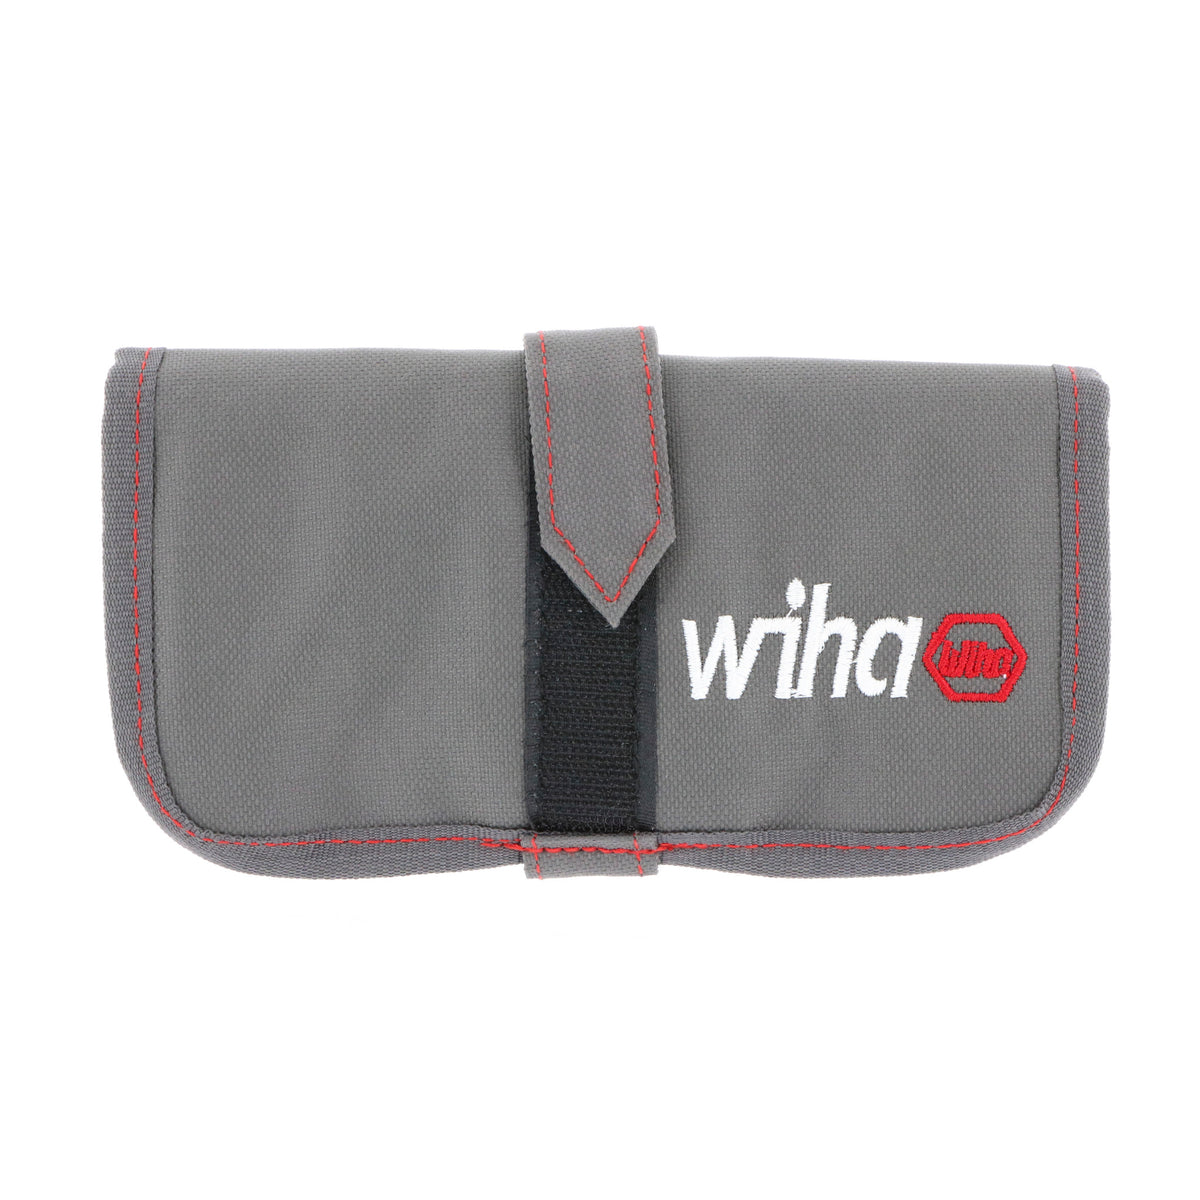 Wiha 91223 Pouch for Insulated Torque Screwdriver and SlimLine Blades